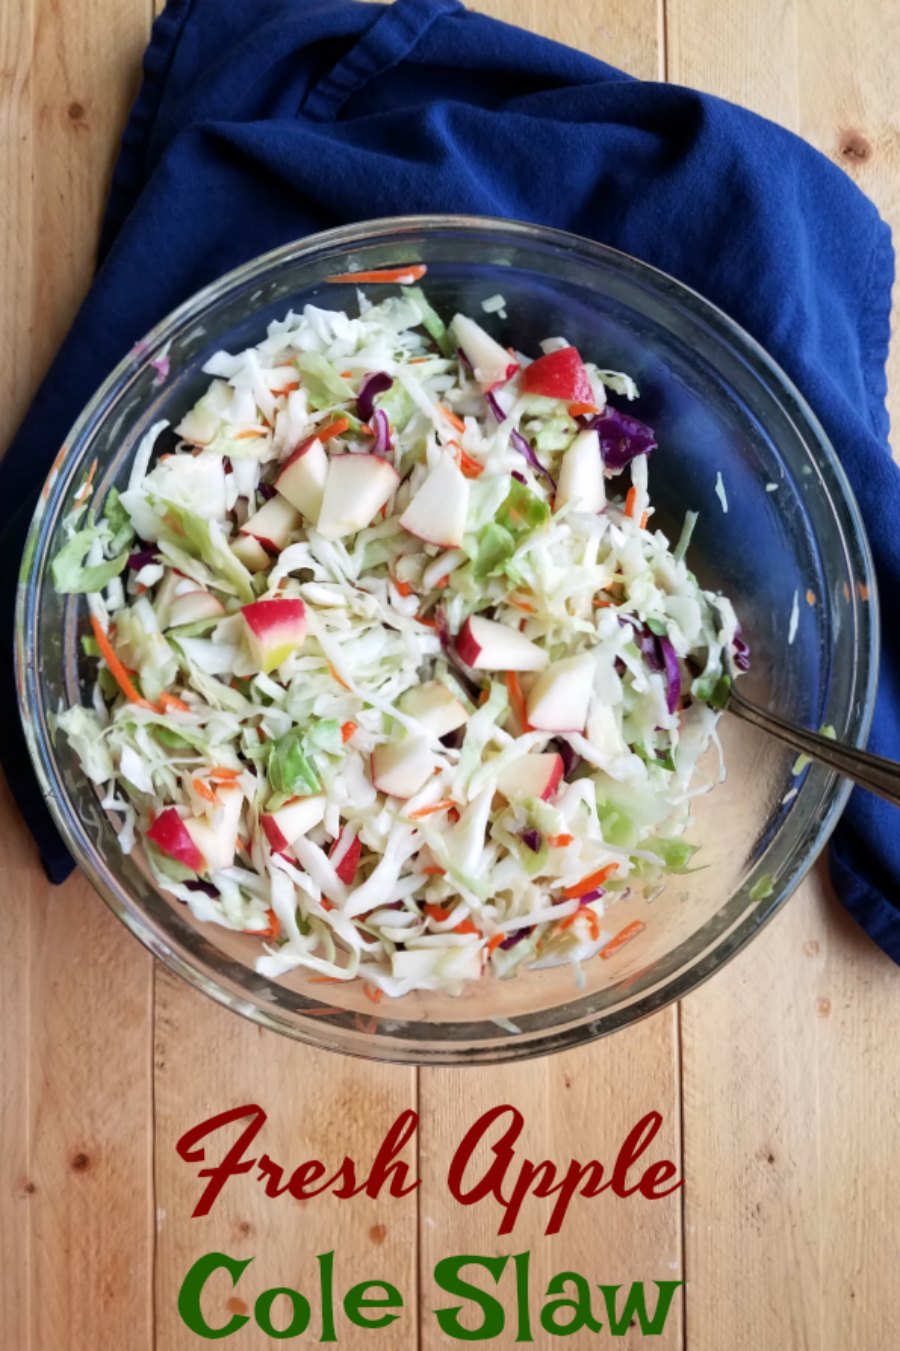 Tasty slaw with a super simple and flavorful dressing and sweet crunchy apples. It makes a fun side dish and yummy salad. 